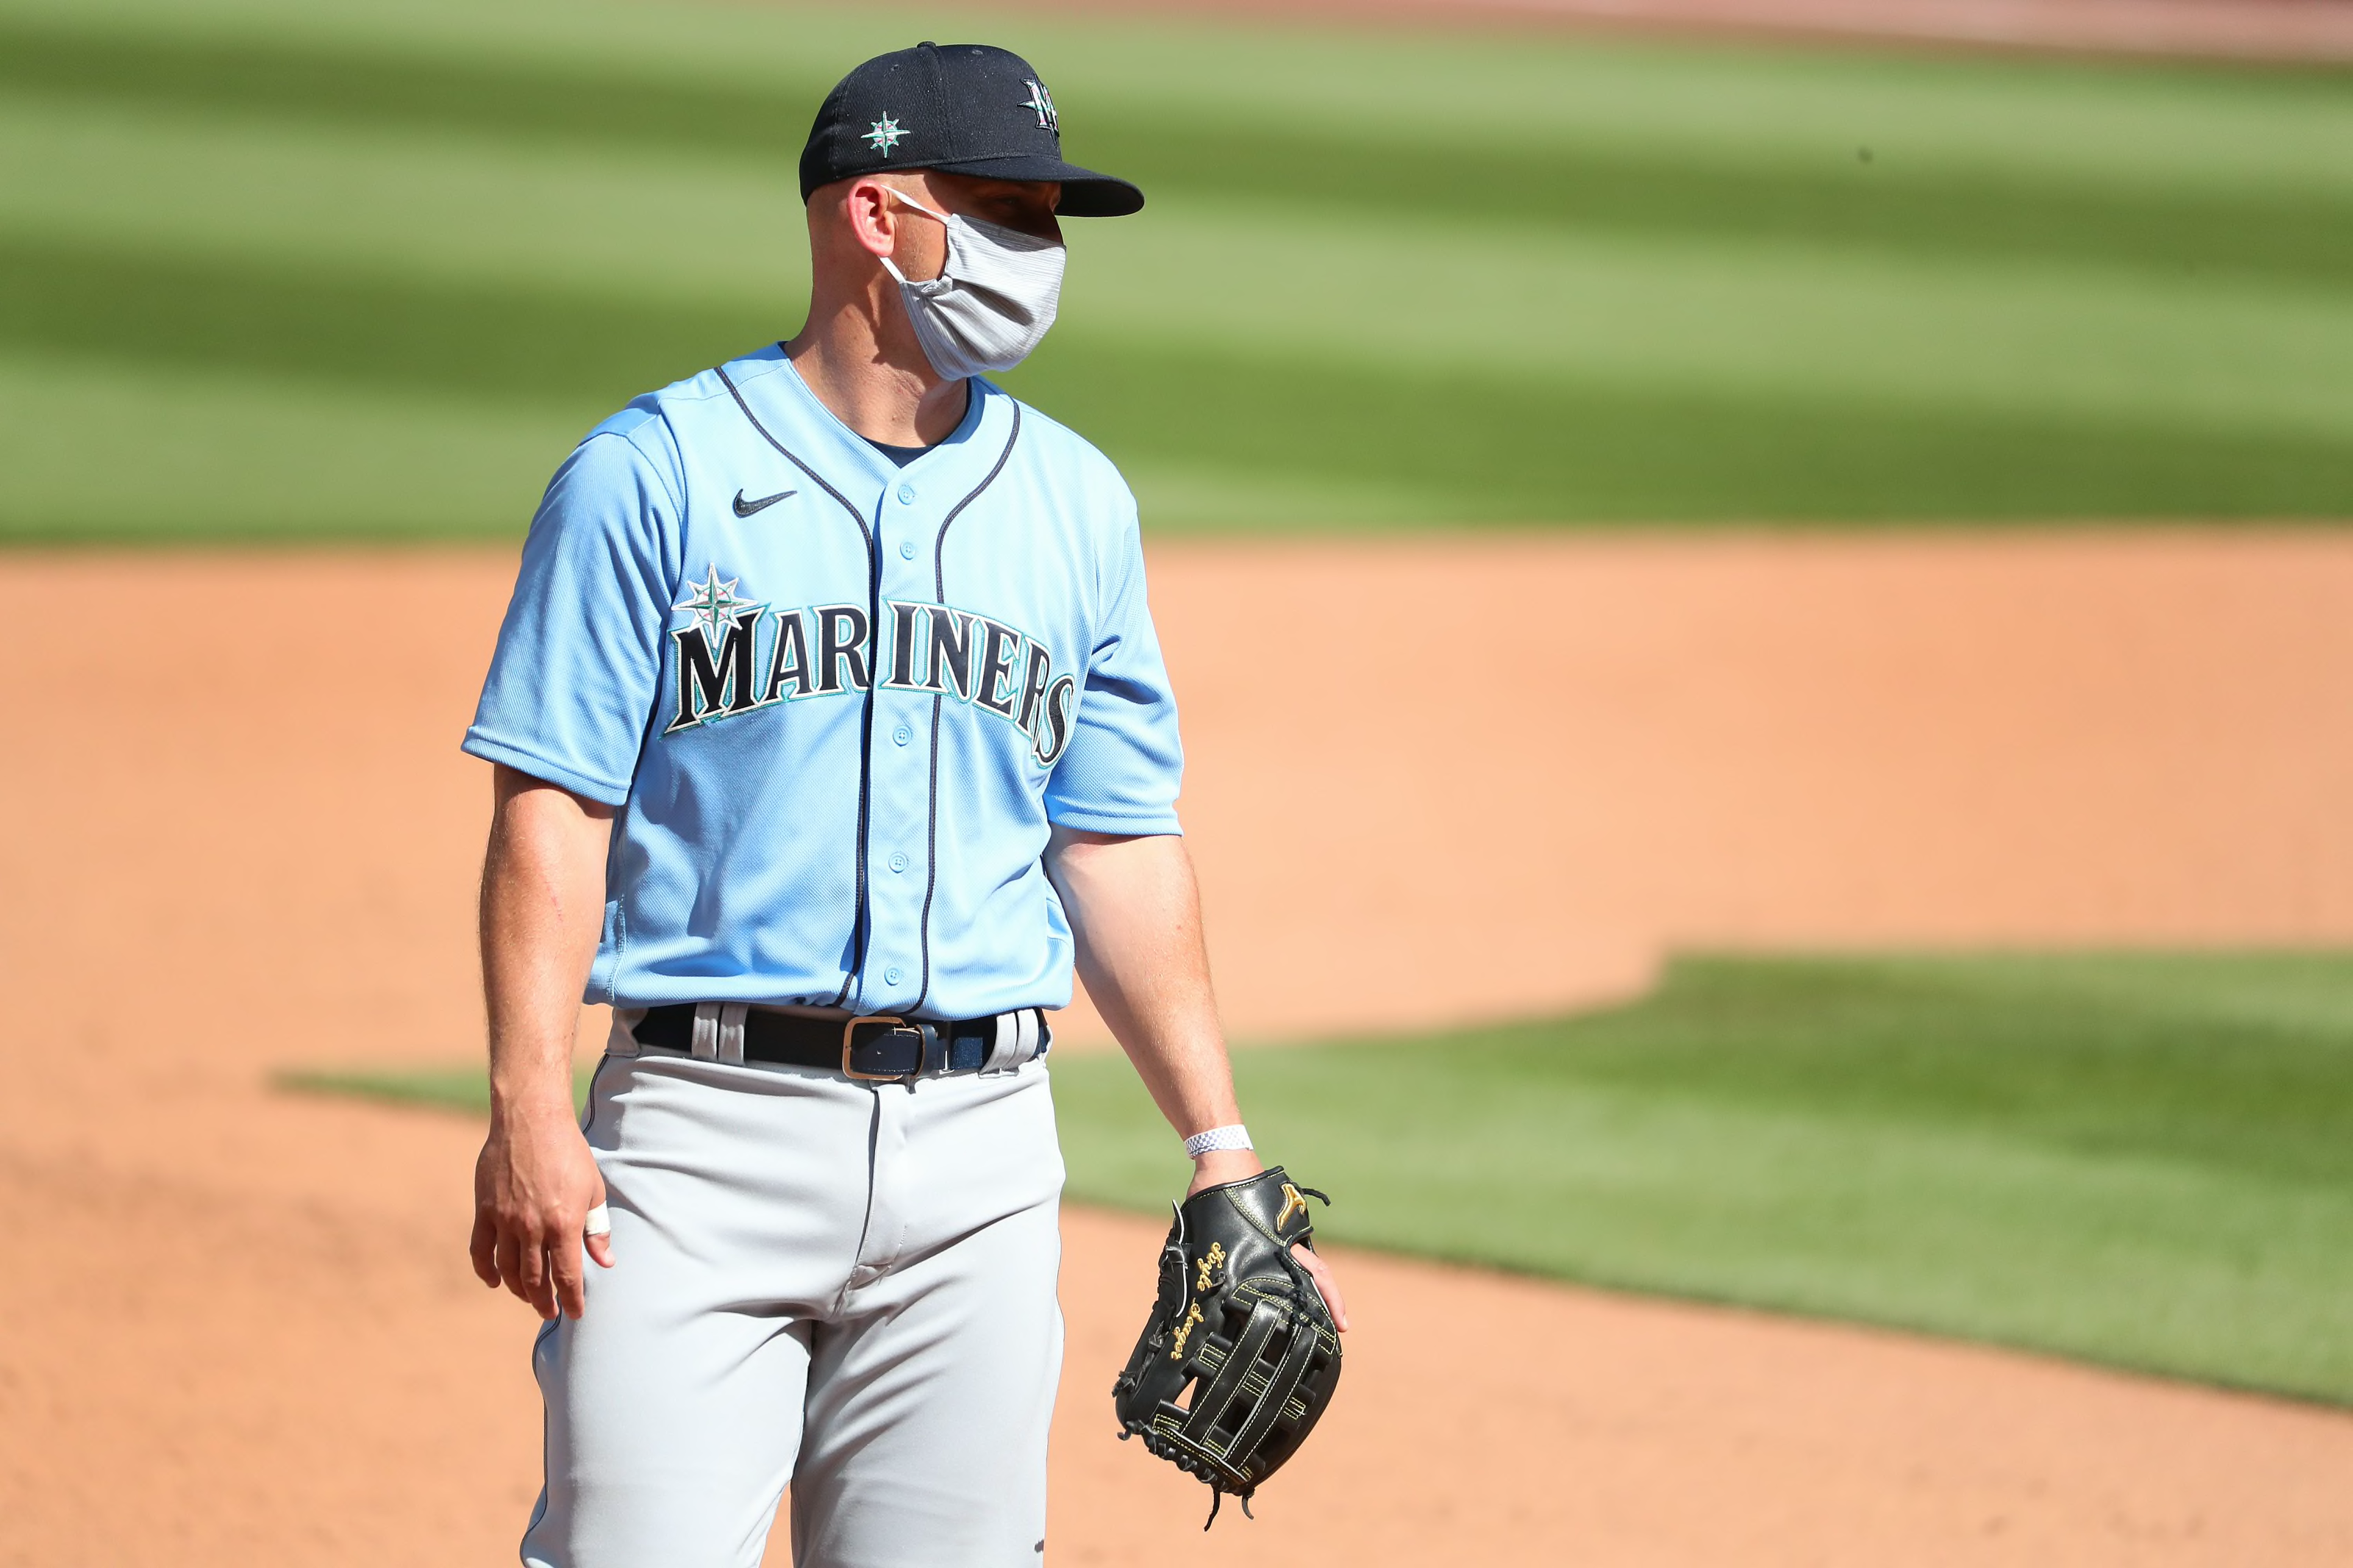 MLB is back: Highlighting Featured Tar Heels on Opening Day - Page 2